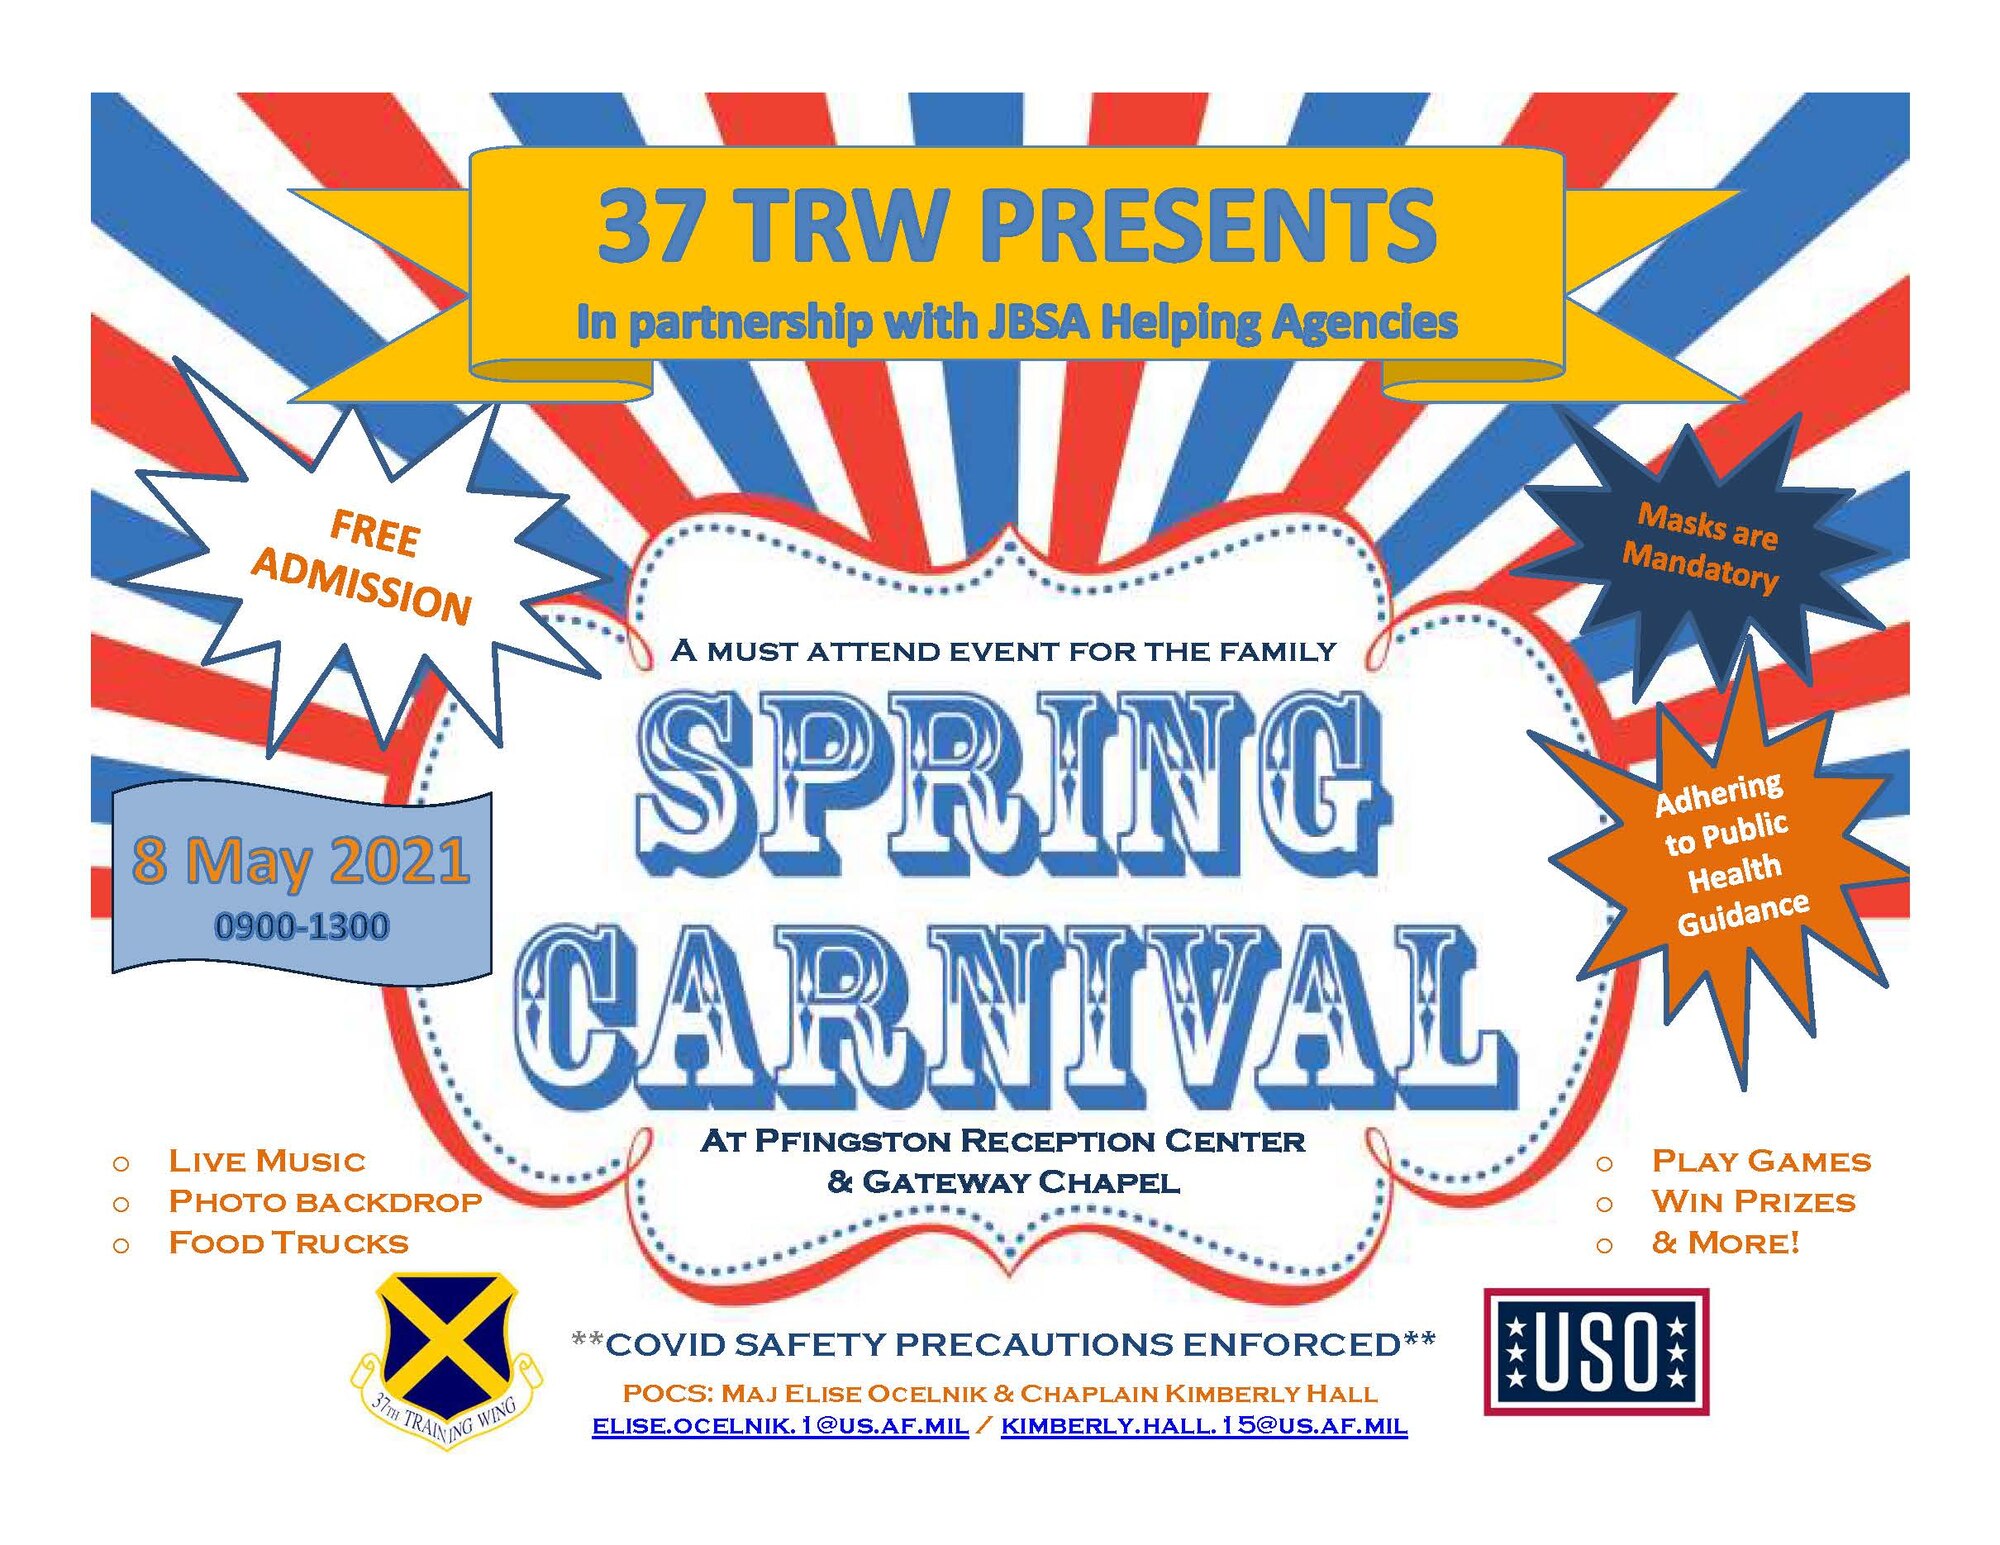 The 37th Training Wing, in conjunction with JBSA Helping Agencies, is presenting the 2021 Spring Carnival May 8, 2021, from 9 a.m. to 1 p.m. at the Pfingston Reception Center and Gateway Chapel, Joint Base San Antonio-Lackland, Texas. The event was rescheduled from its original date of May 1. (U.S. Air Force graphic)